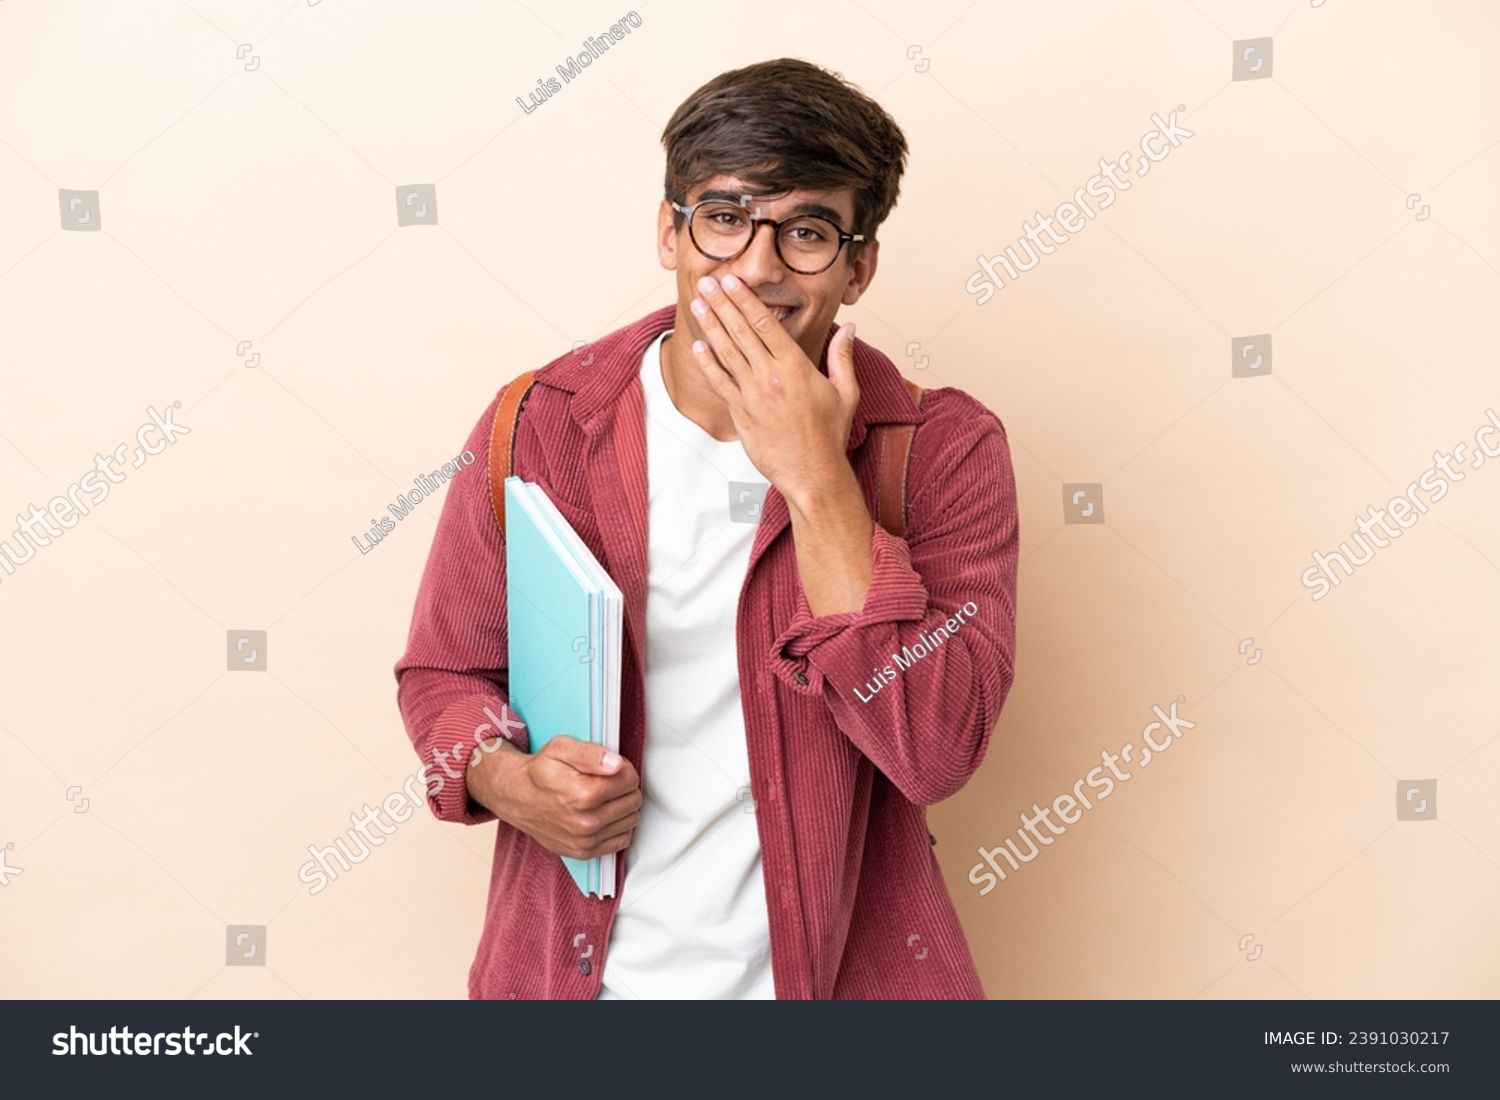 Young student caucasian man isolated on ocher background happy and smiling covering mouth with hand #2391030217